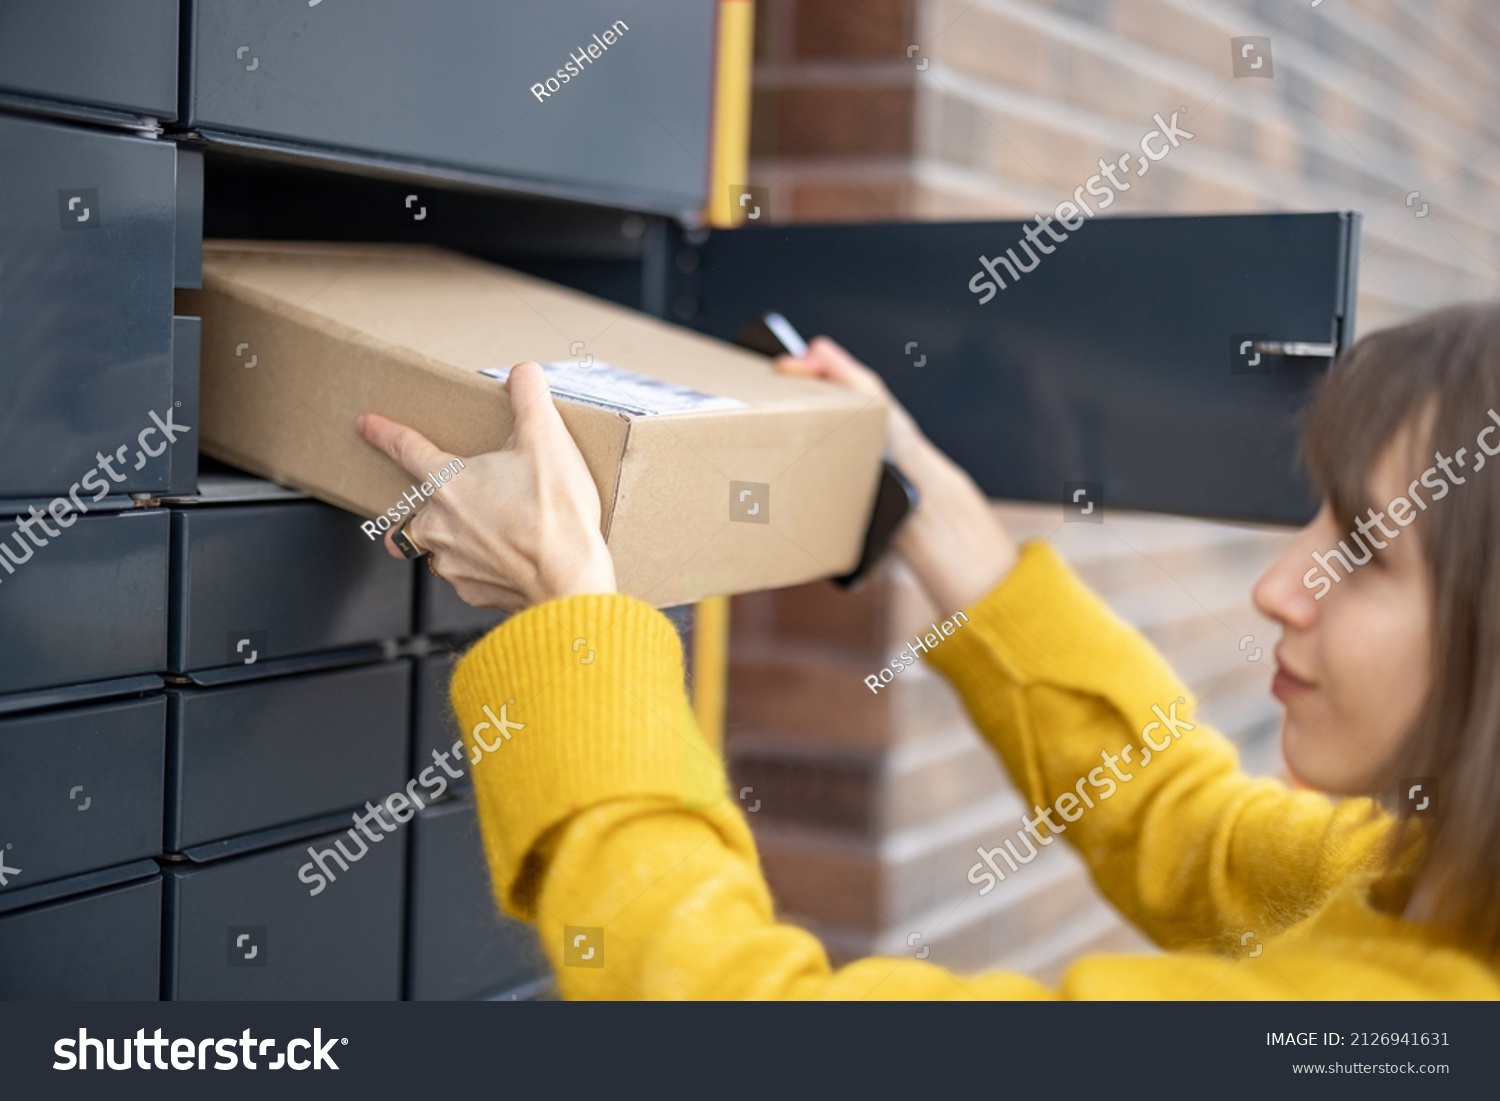 Young woman getting parcel from cell of automatic post terminal outdoors. Concept of contactless and smart delivery. Idea of modern shipping and logistics. Woman wearing yellow sweater #2126941631